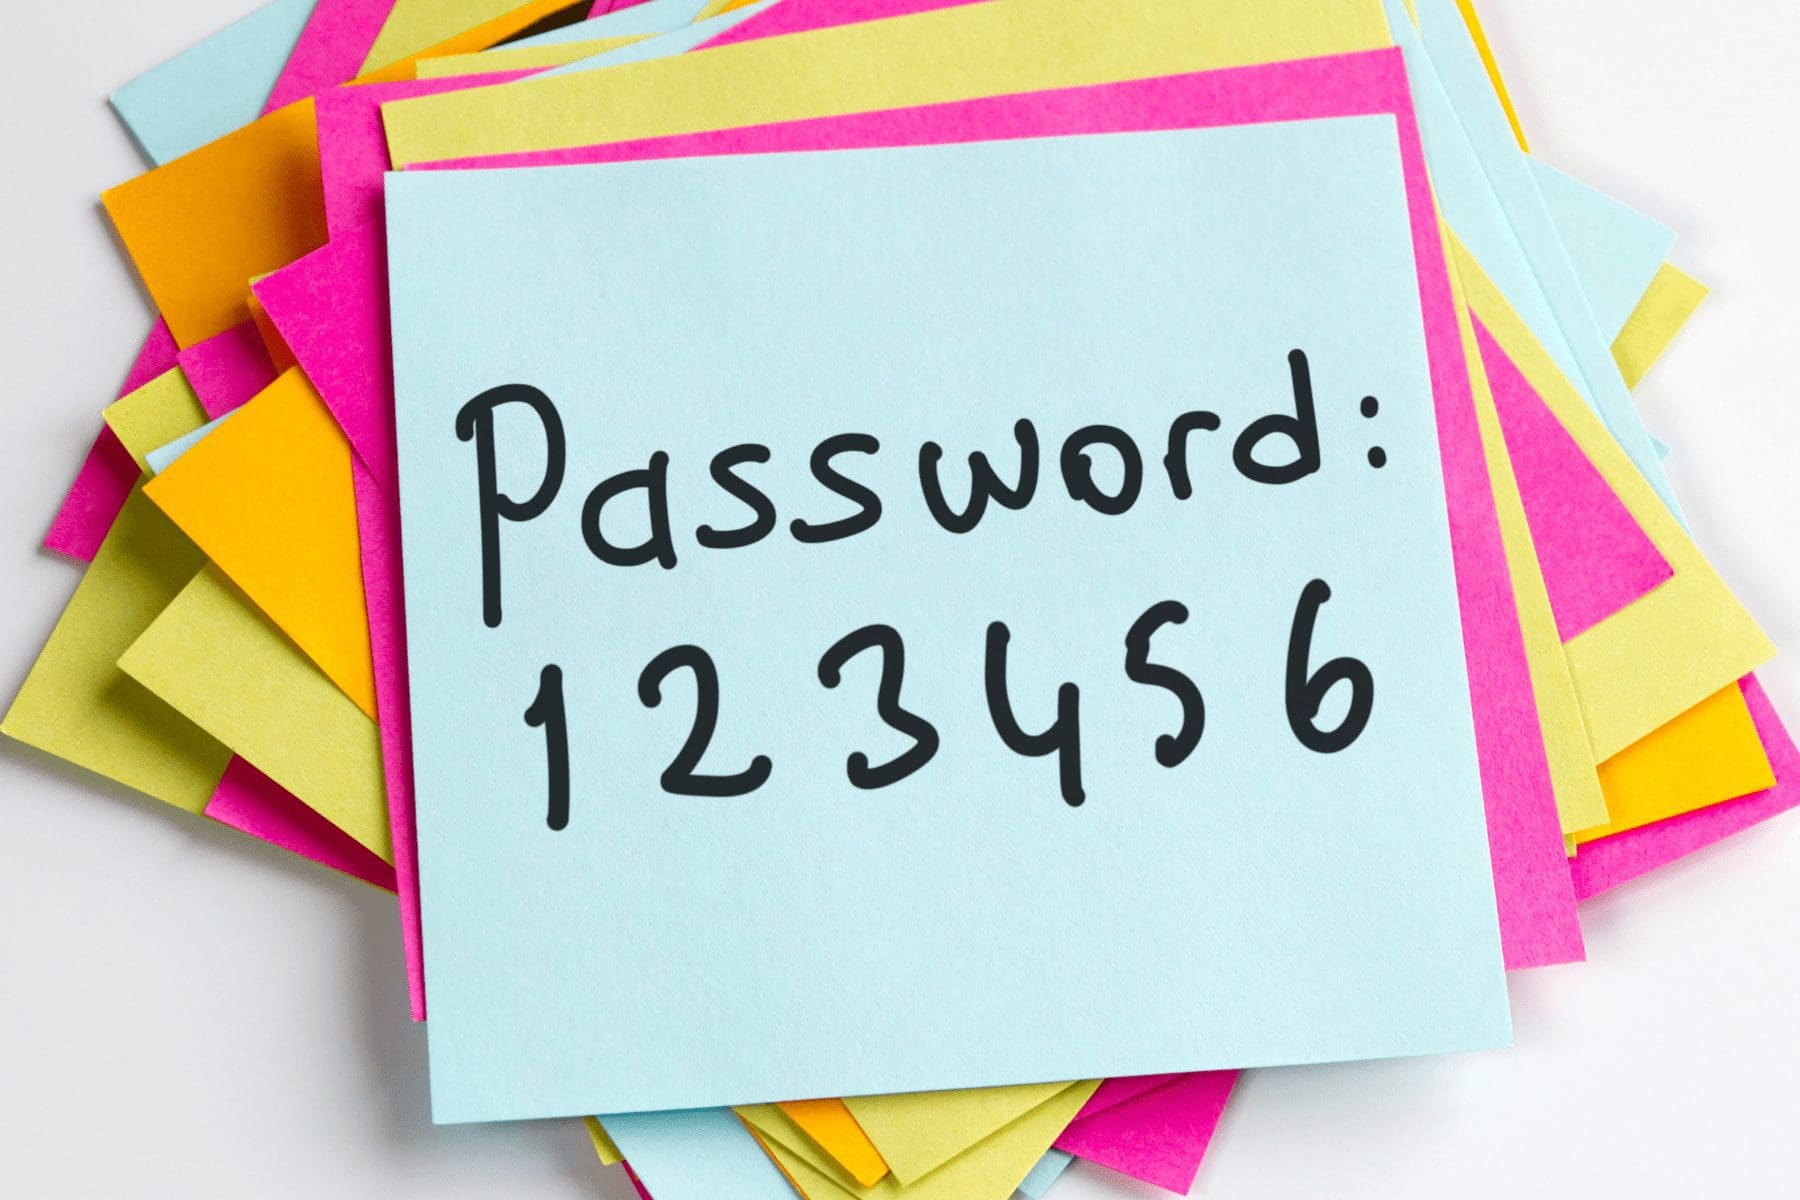 commonly used password written on a sticky note